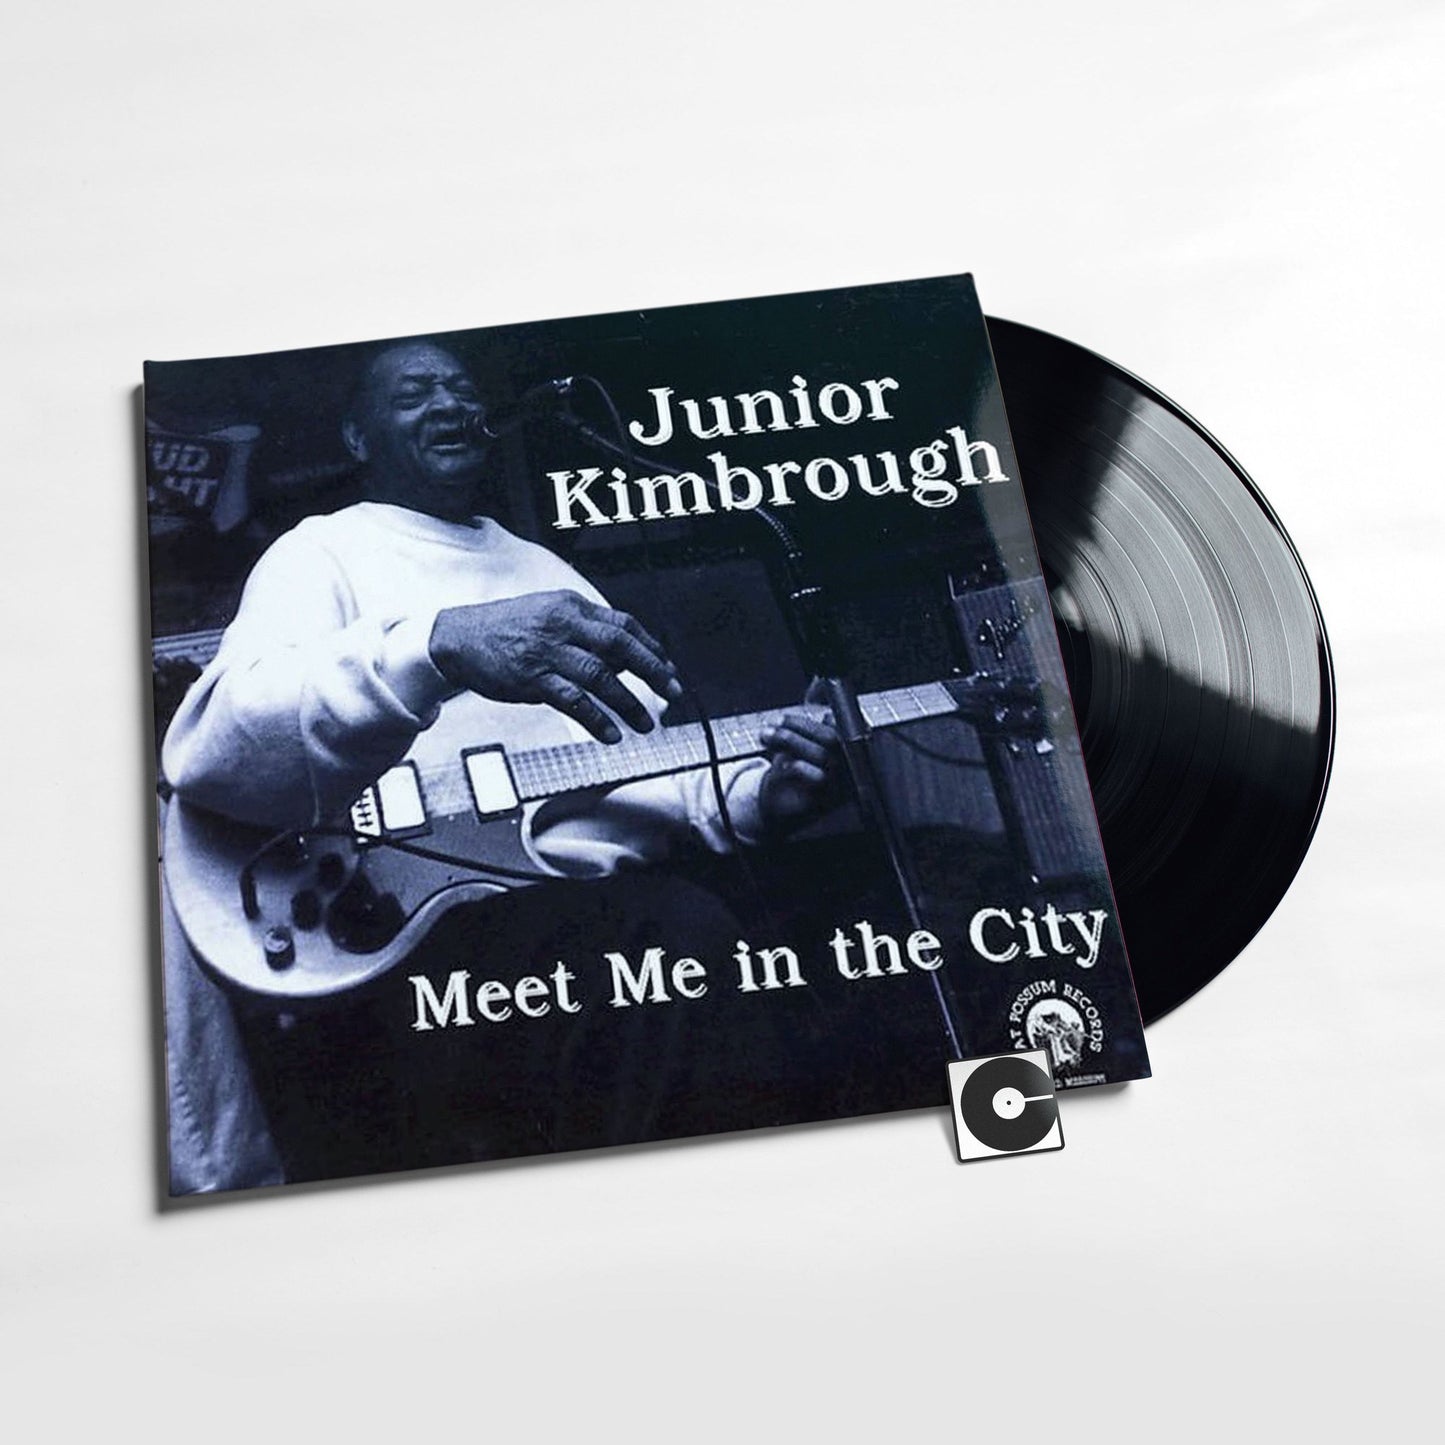 Junior Kimbrough - "Meet Me In The City"